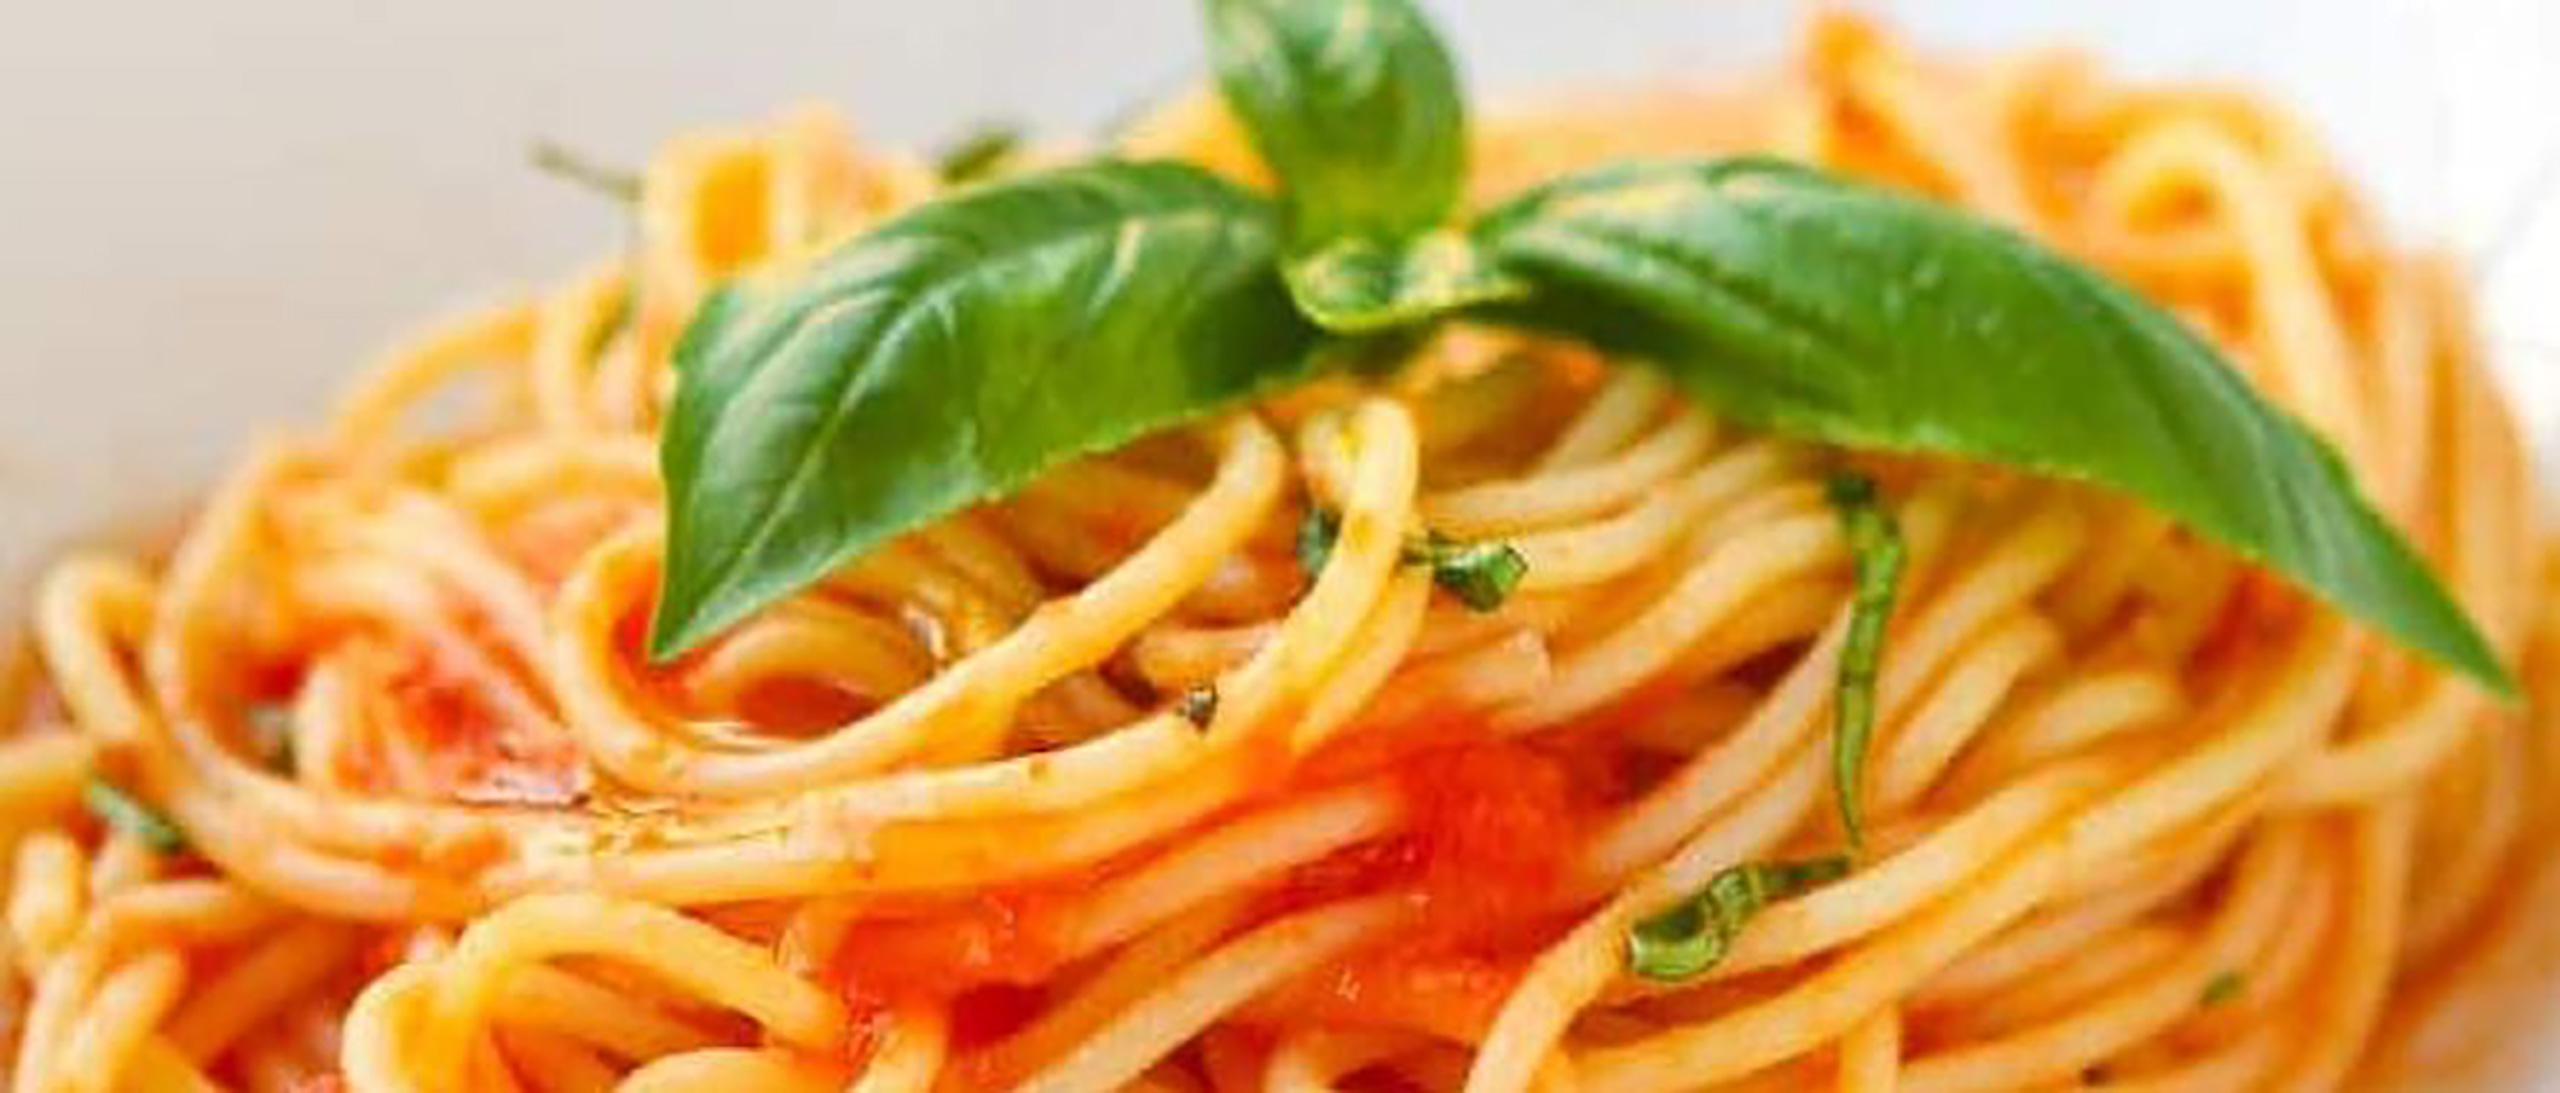 A bowl of thick homemade spaghetti with tomatoes diced medium fine and freshly picked basil leaves